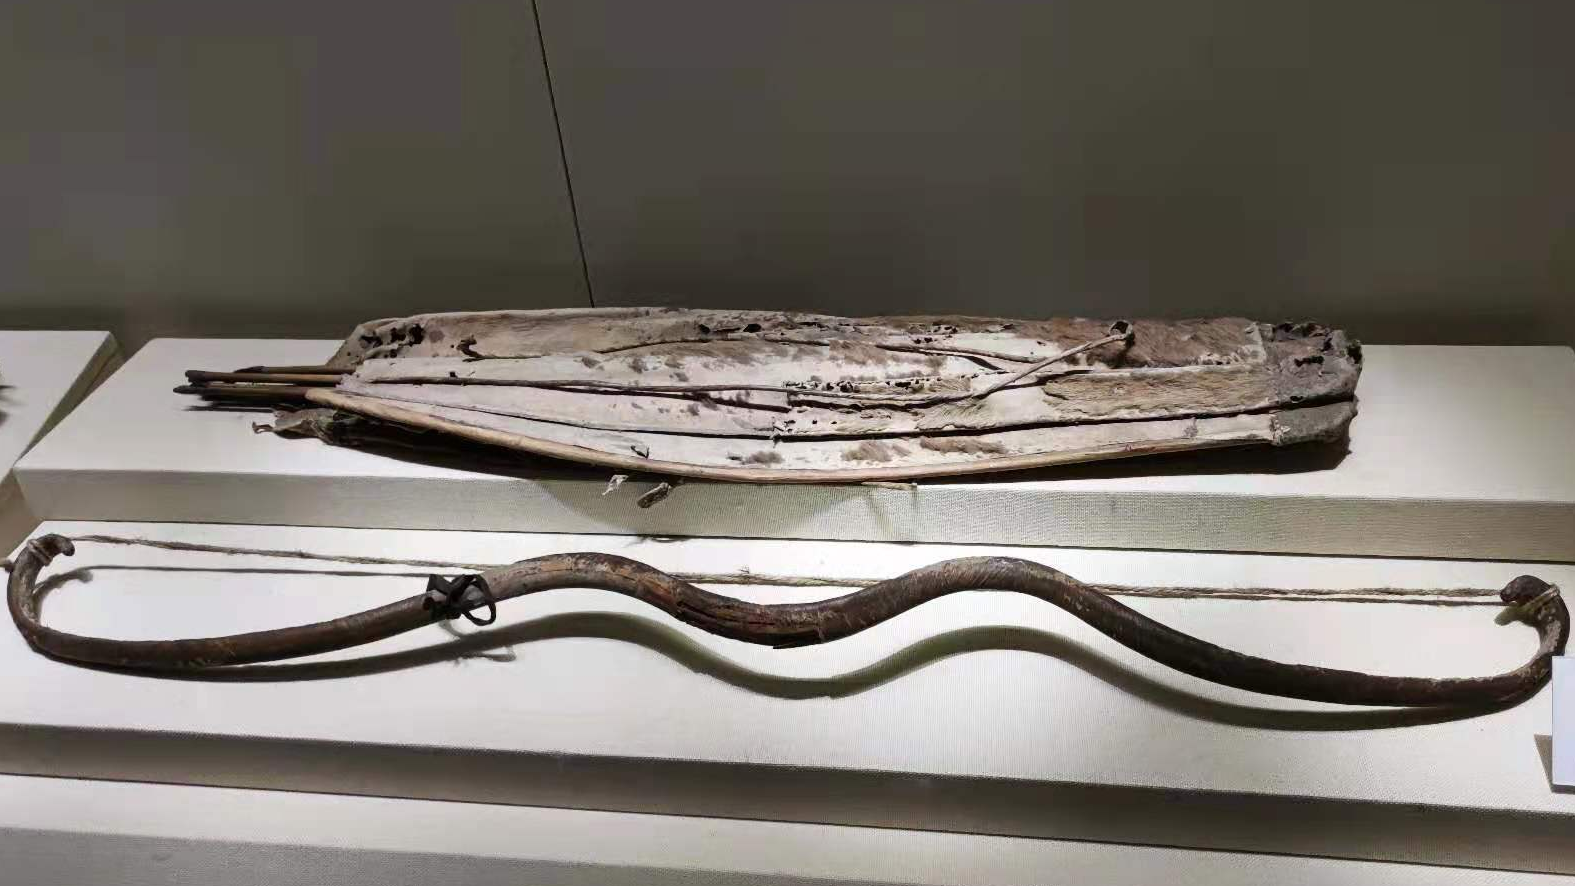 A 2,800-year-old Scythian-style bow and quiver, unearthed from Subeixi cemetery in Shanshan County. Xinjiang Uygur Autonomous Region Museum in Urumqi, China.png